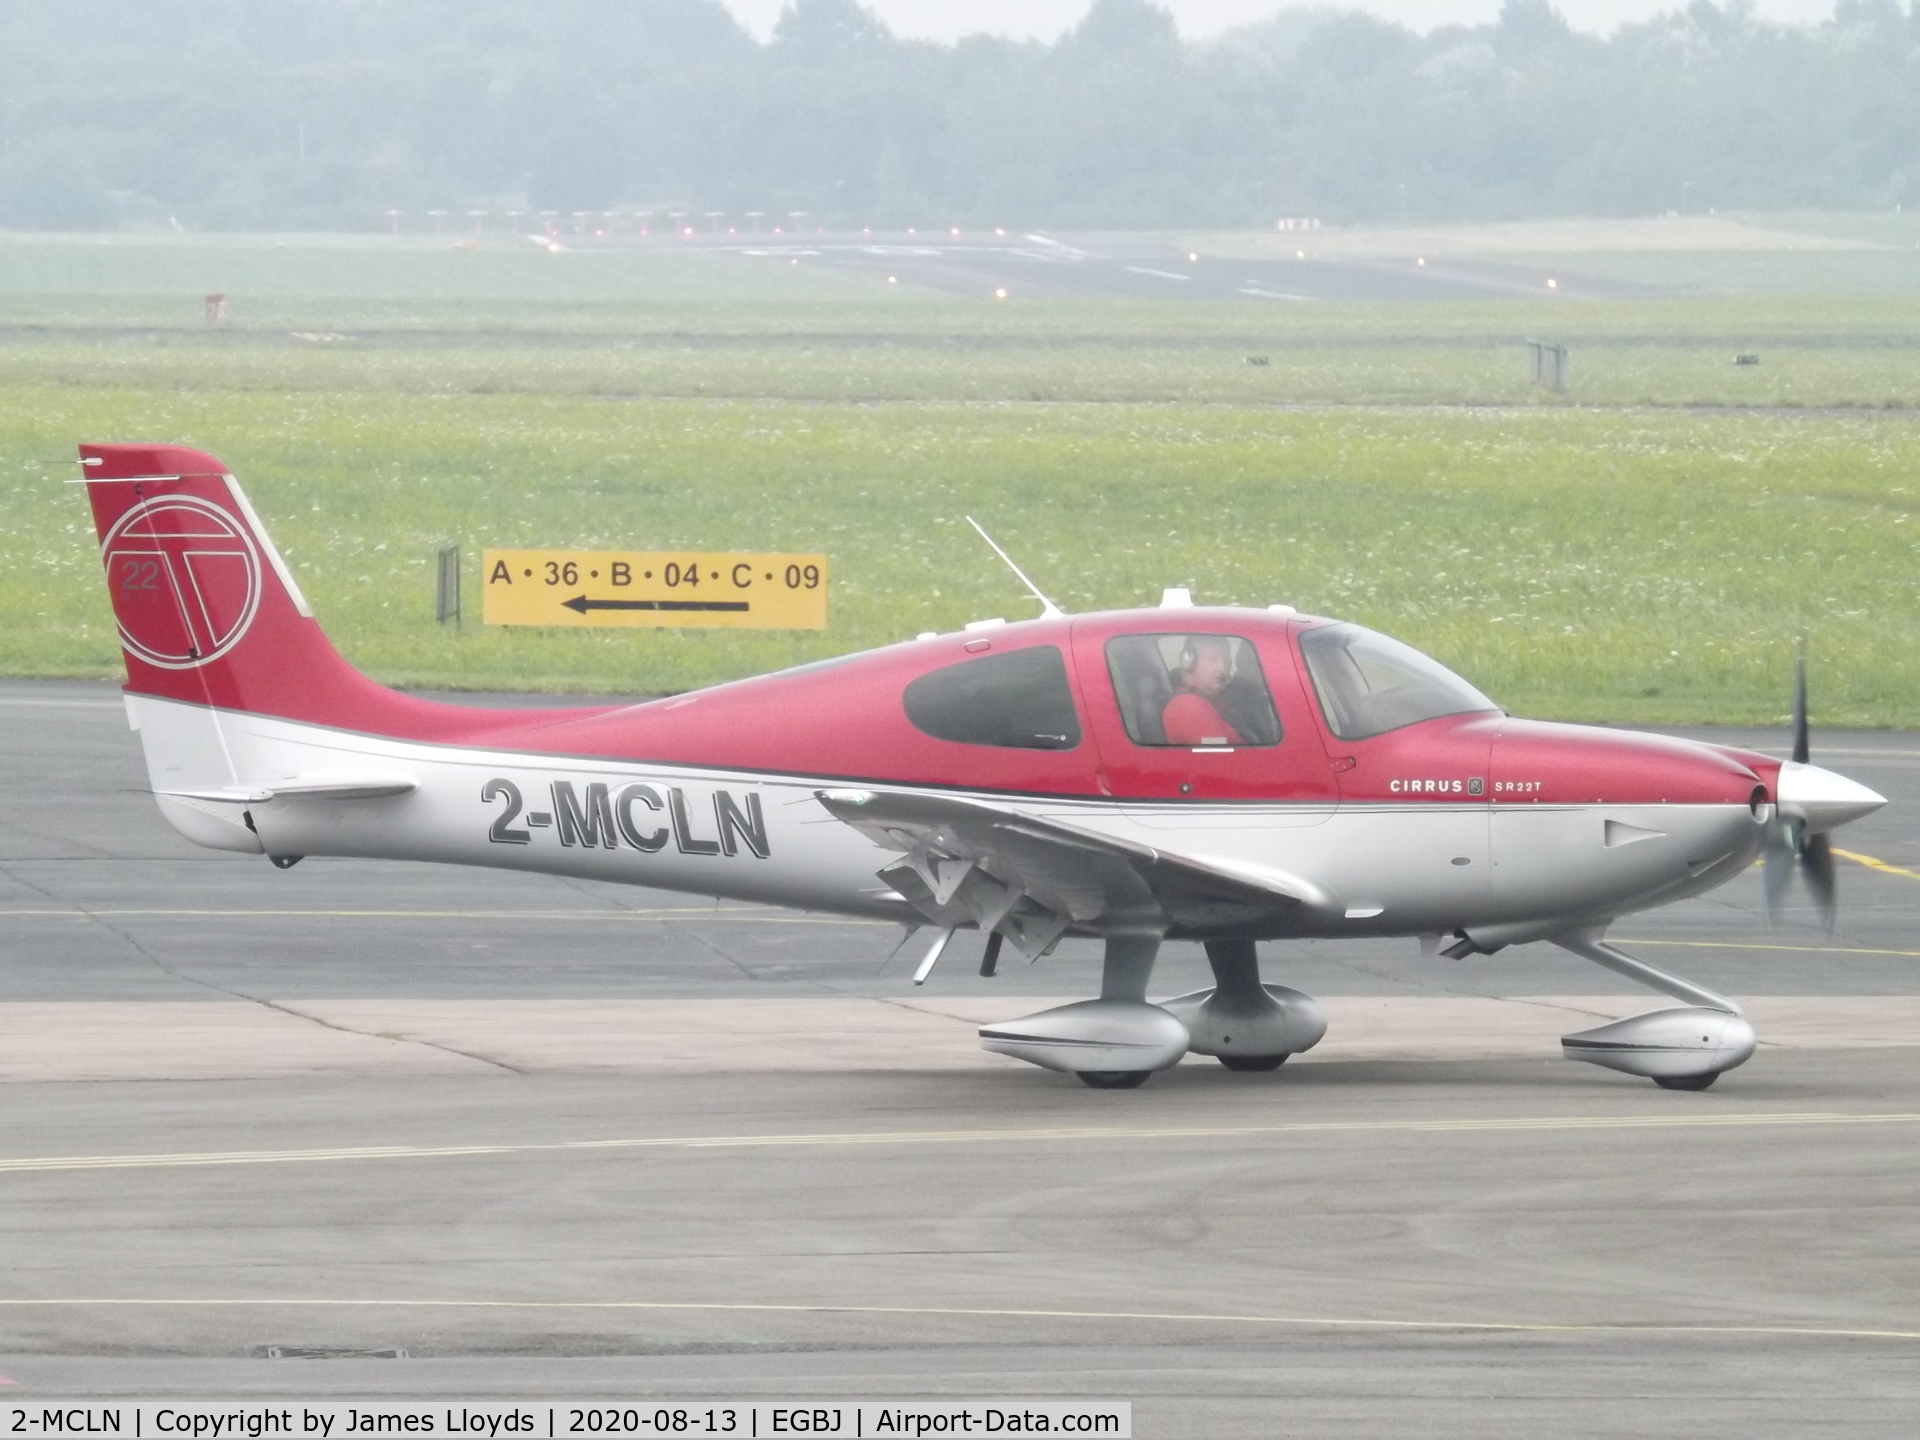 2-MCLN, 2011 Cirrus SR22T C/N 0177, Doing some power checks at Gloucestershire Airport.